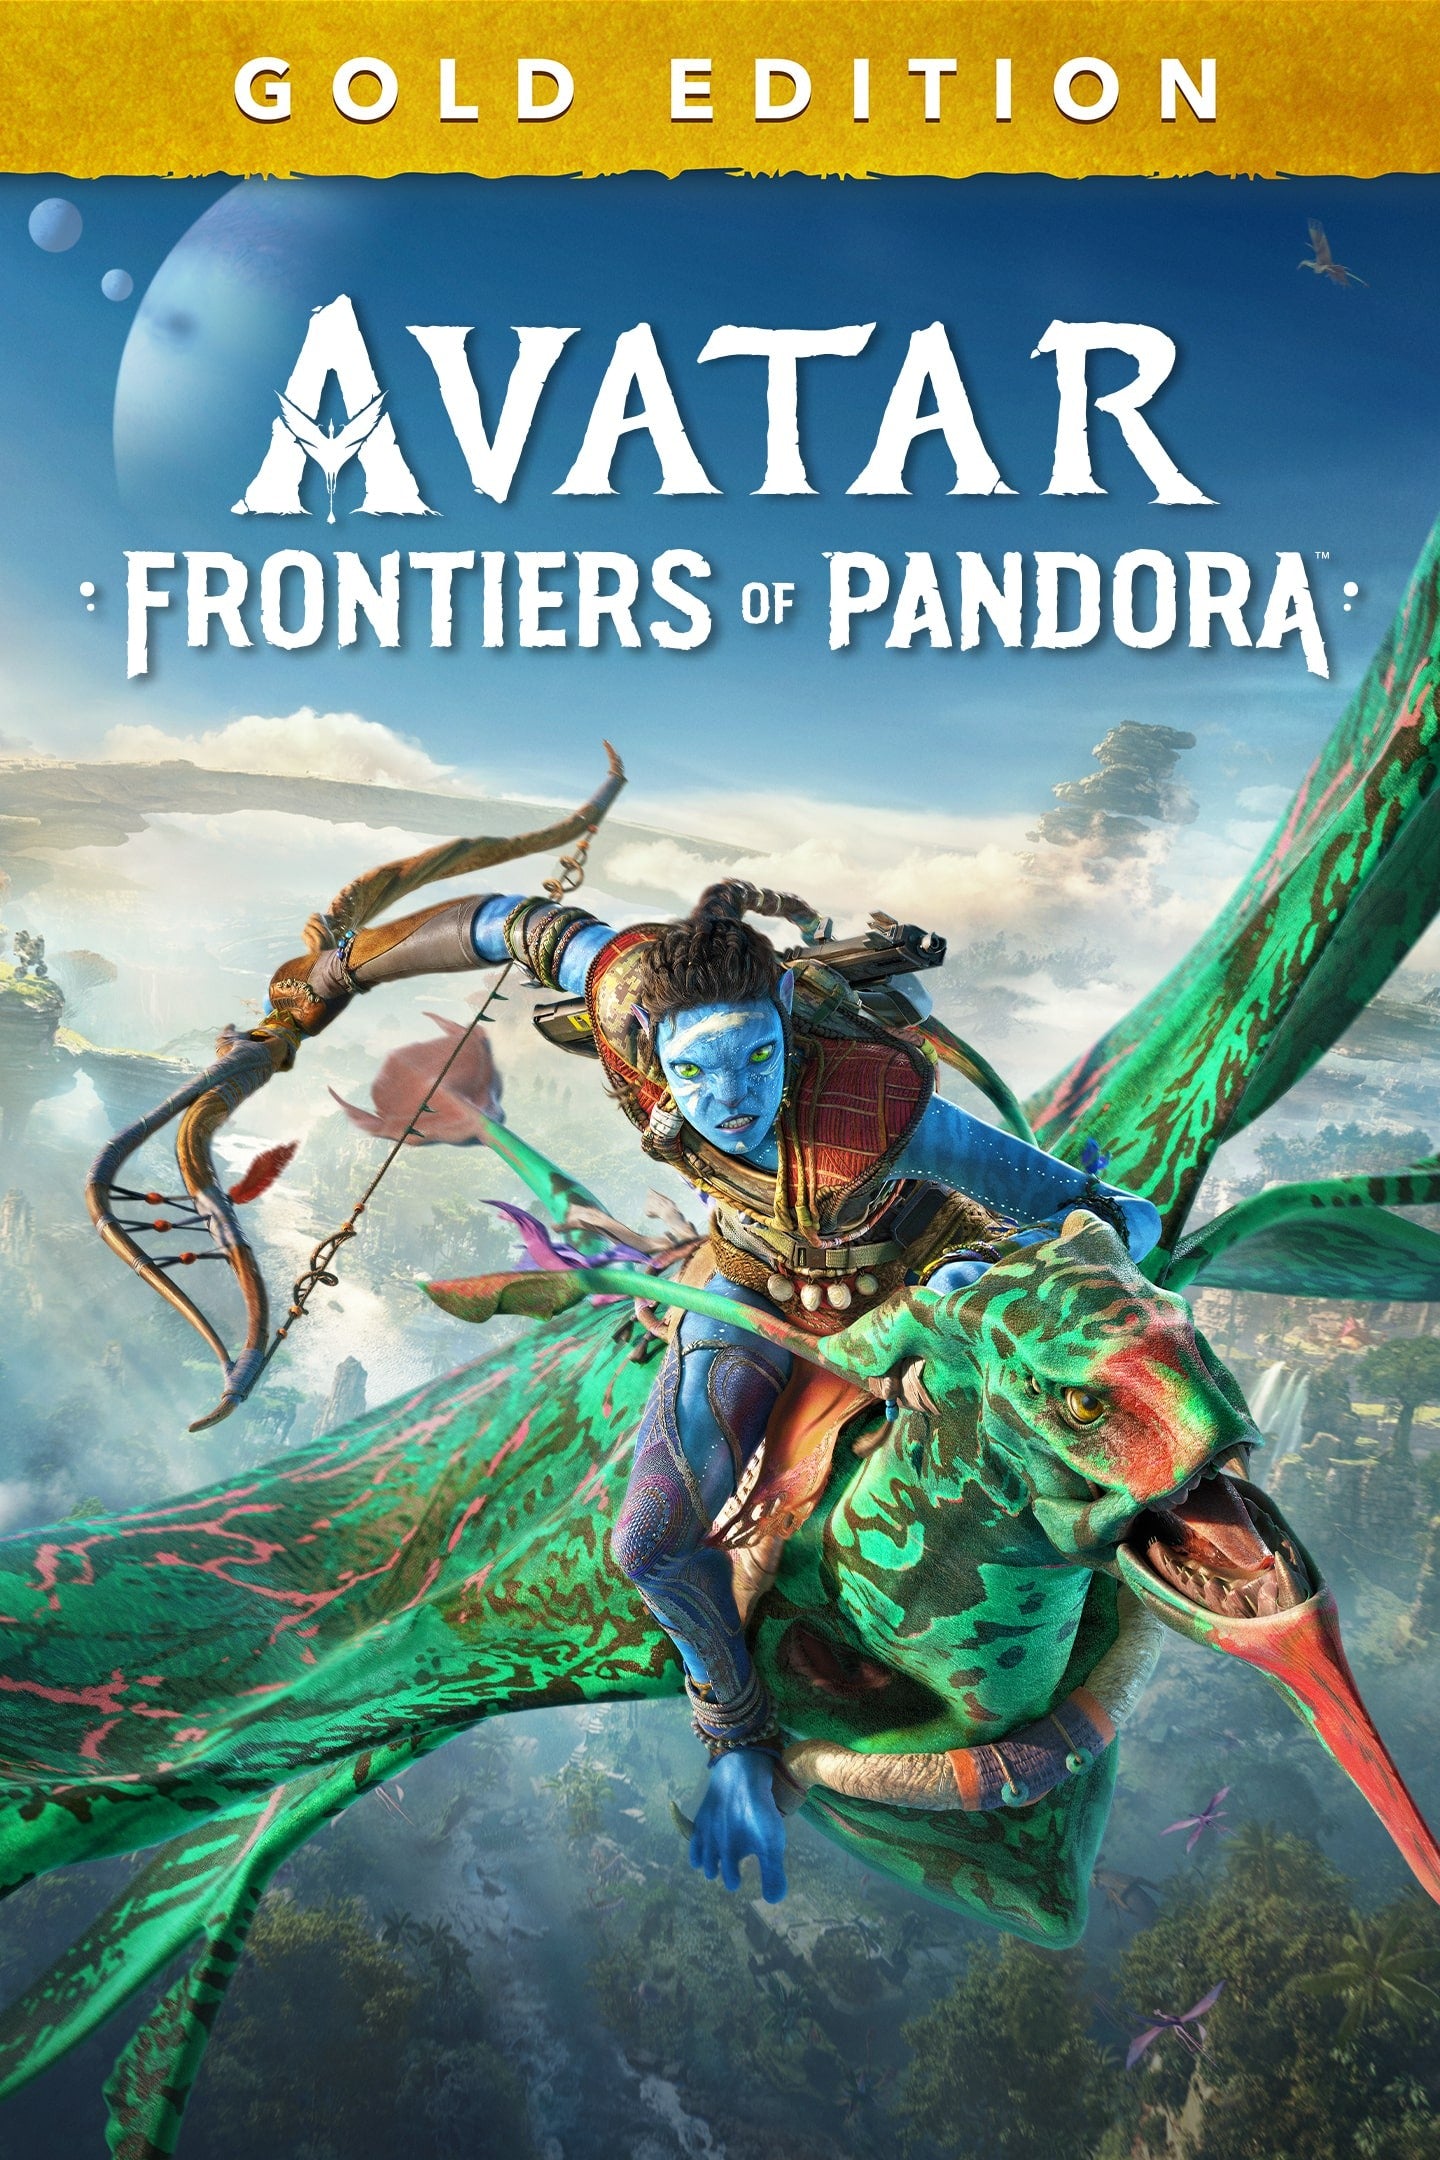 AVATAR: FRONTIERS OF PANDORA (Gold Edition) - Xbox